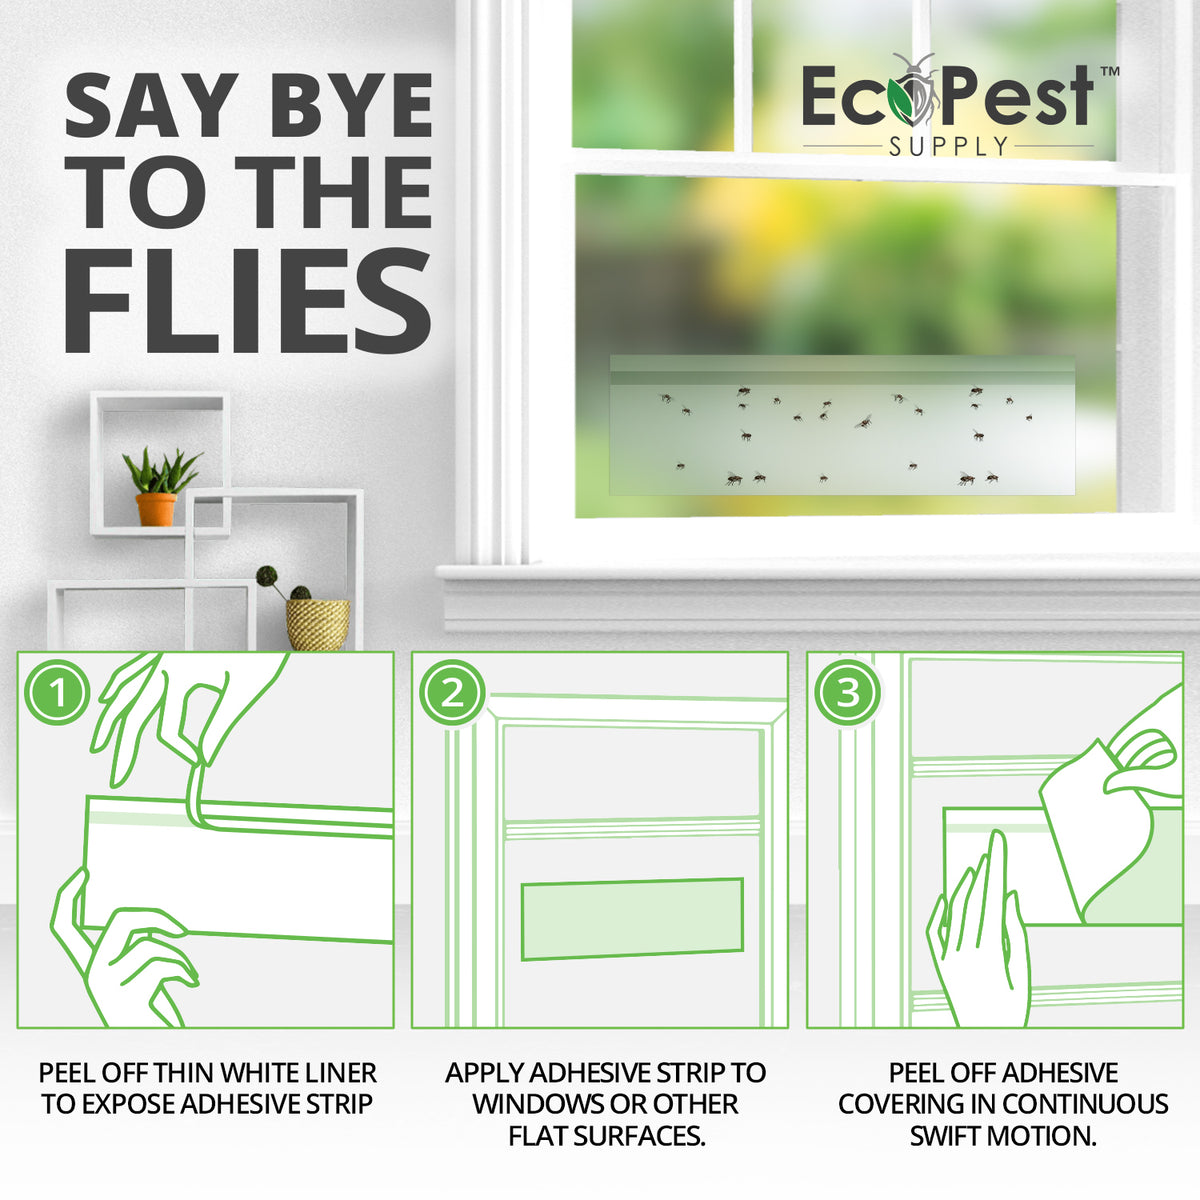 Dr. Killigan's The Fly Inn, Window Fly Traps, Sticky Fly Strip, Indoor  Insect